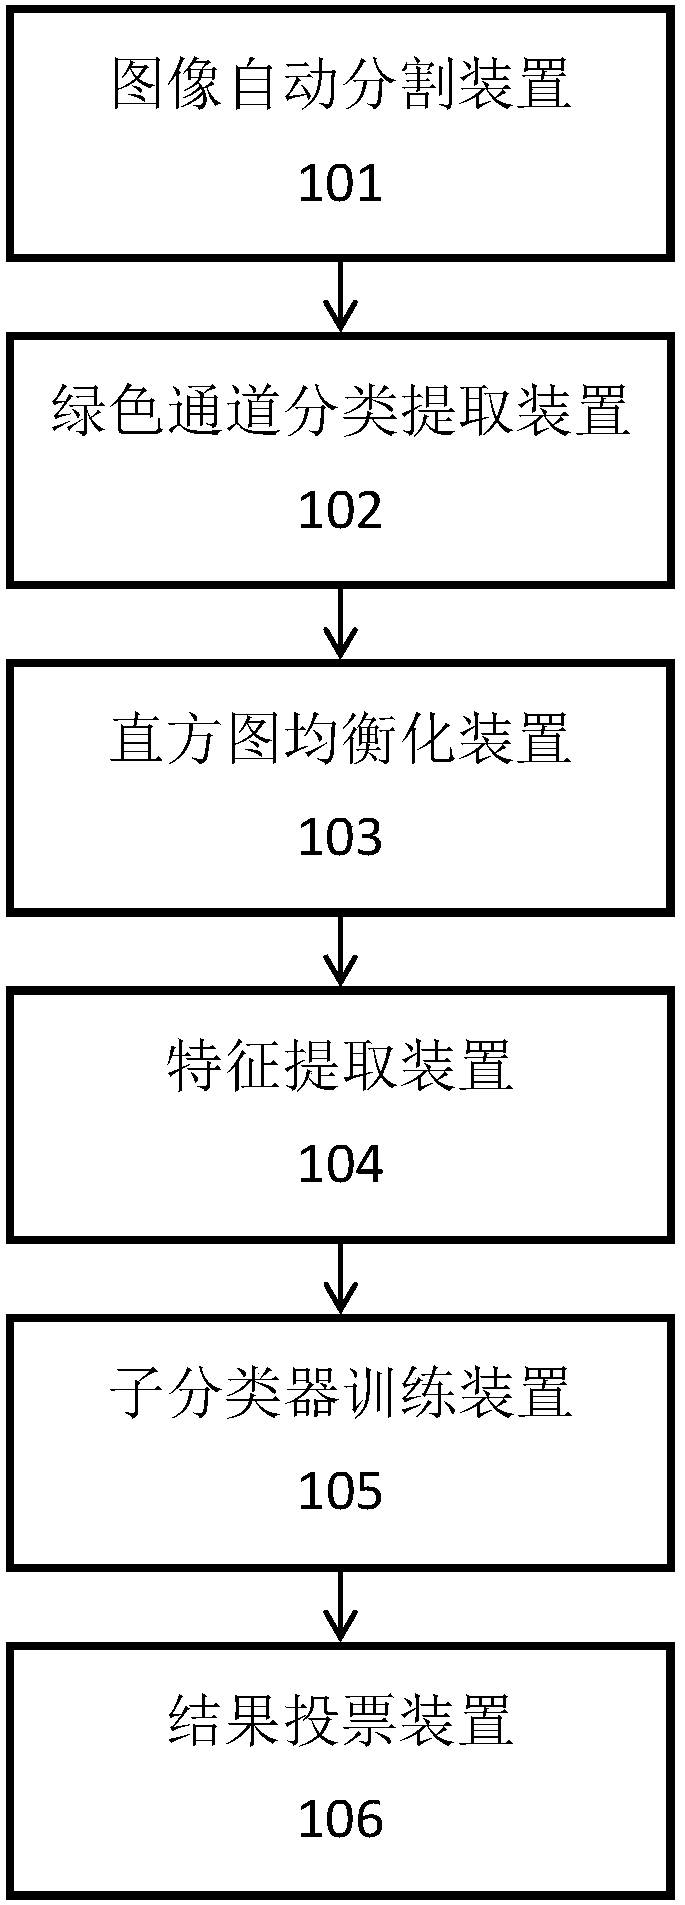 Medical image grading system and method based on deep convolutional neural network